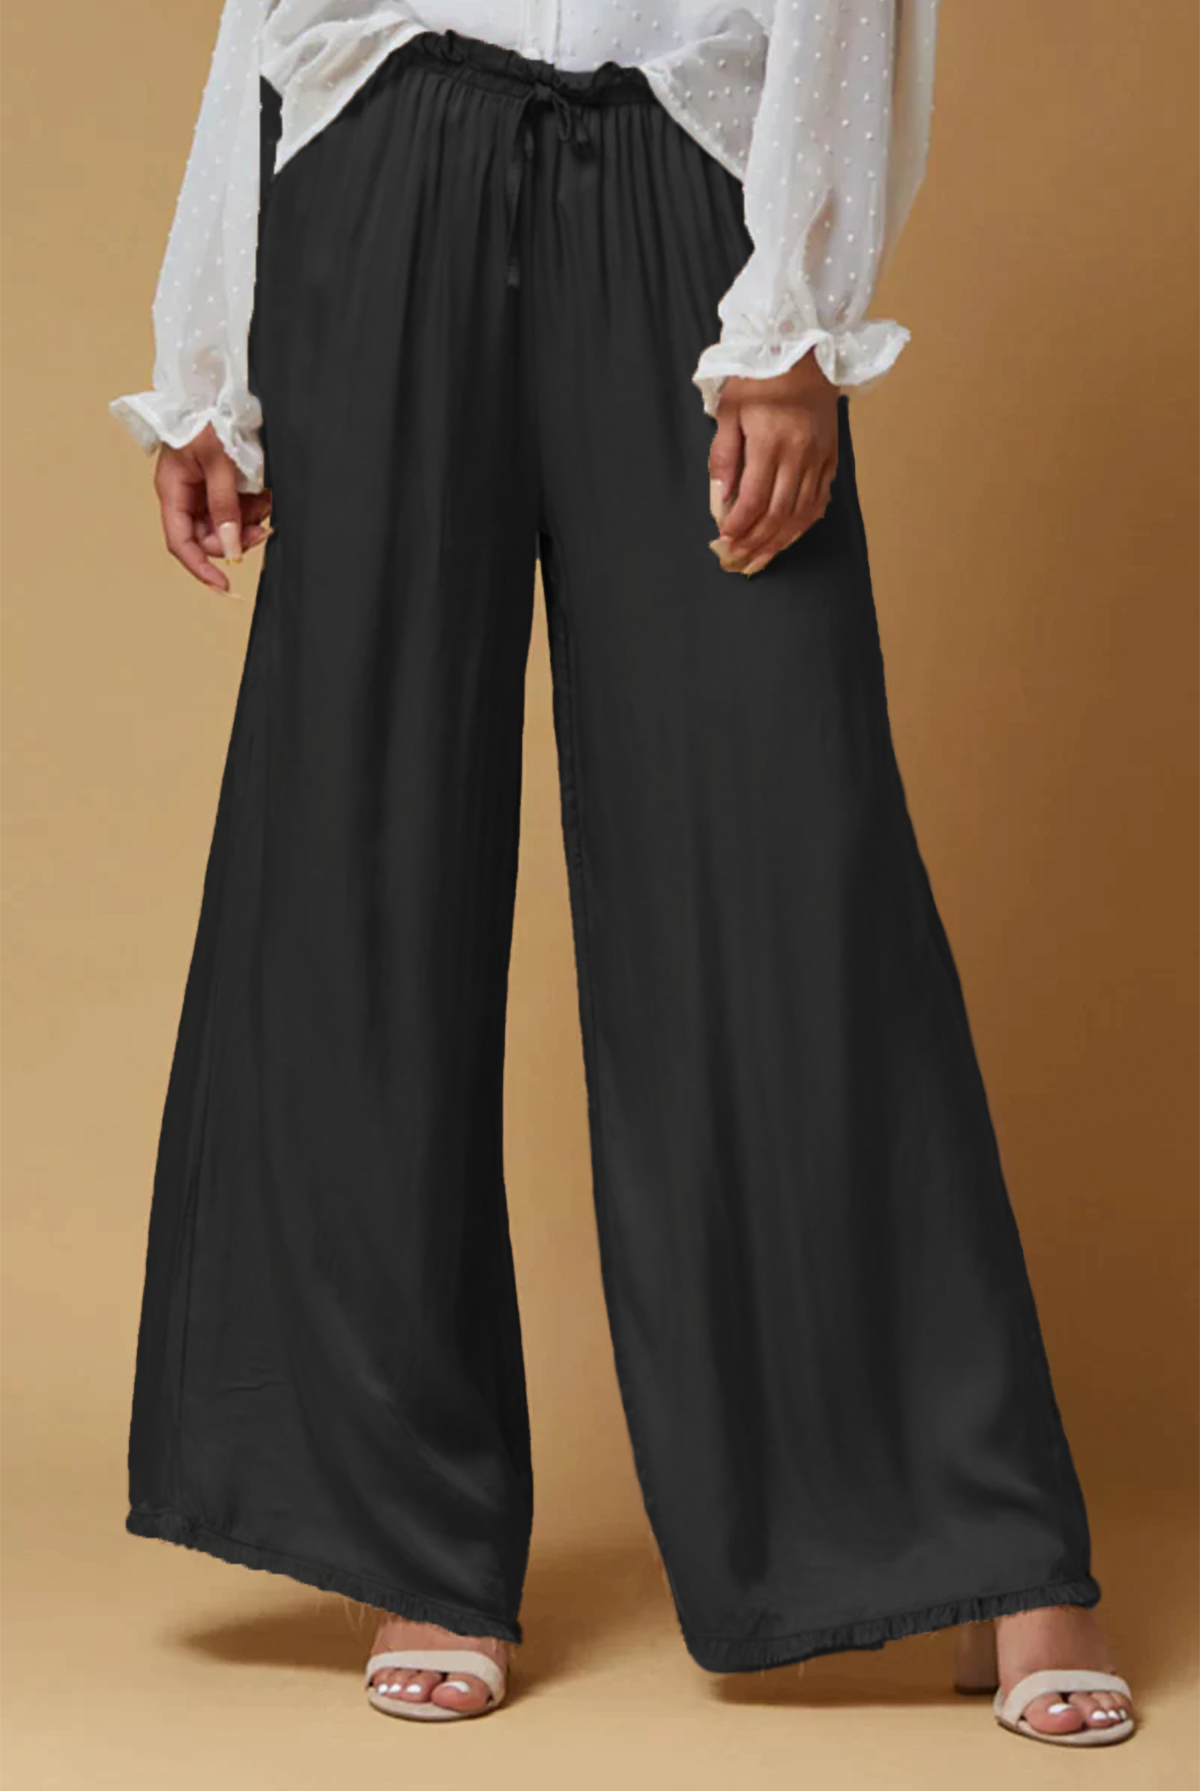 Lola Silk Pant by Scandal Italy in BlackLOLA SILK PANT BY SCANDAL ITALY IN BLACK